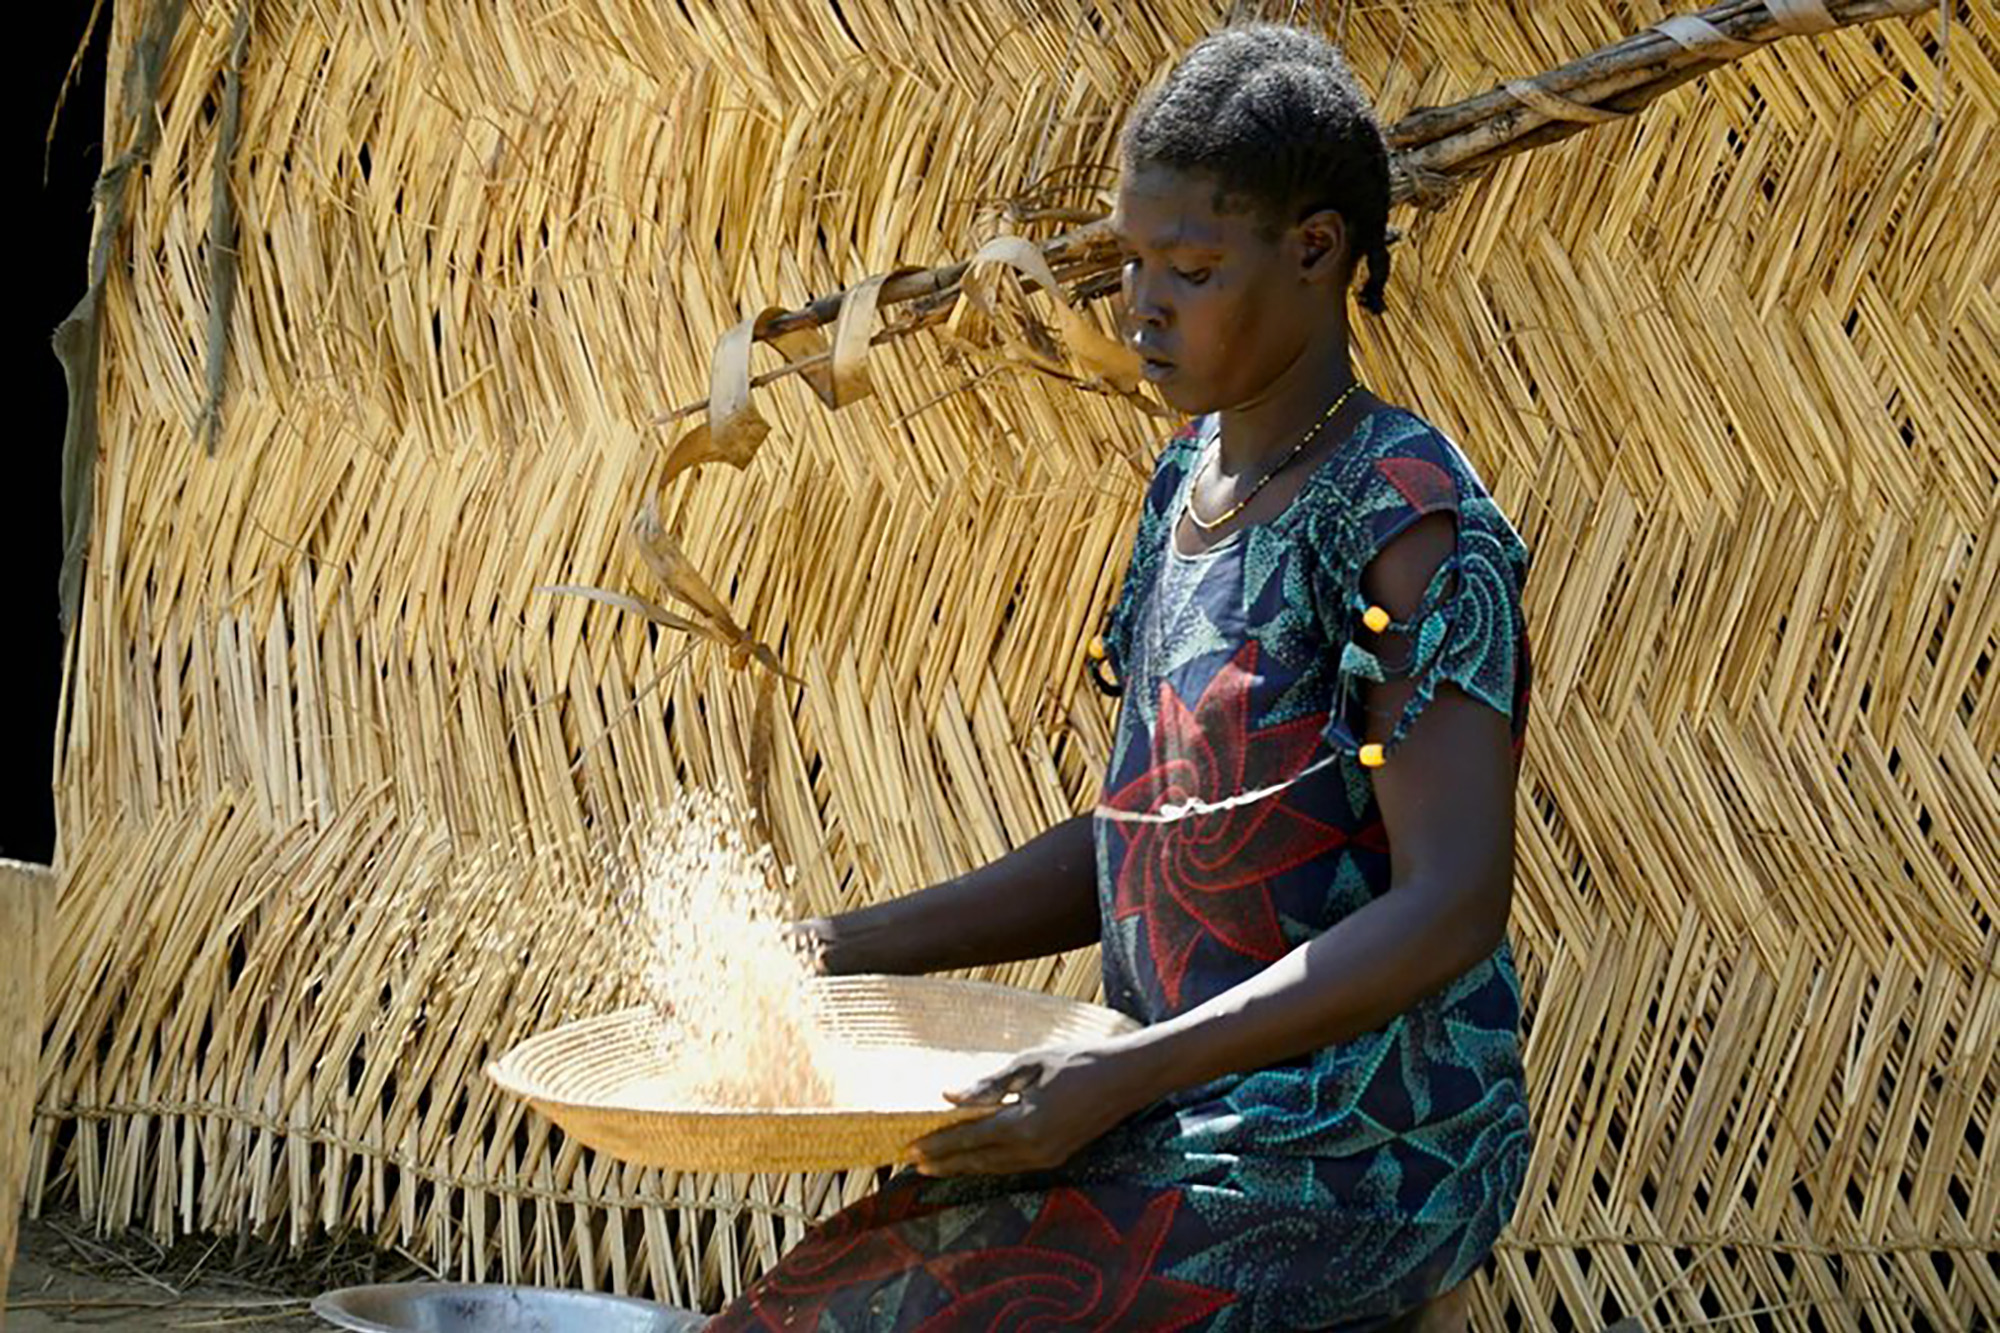 A woman removes the husks from the rice she harvests before cooking it to feed her children. 